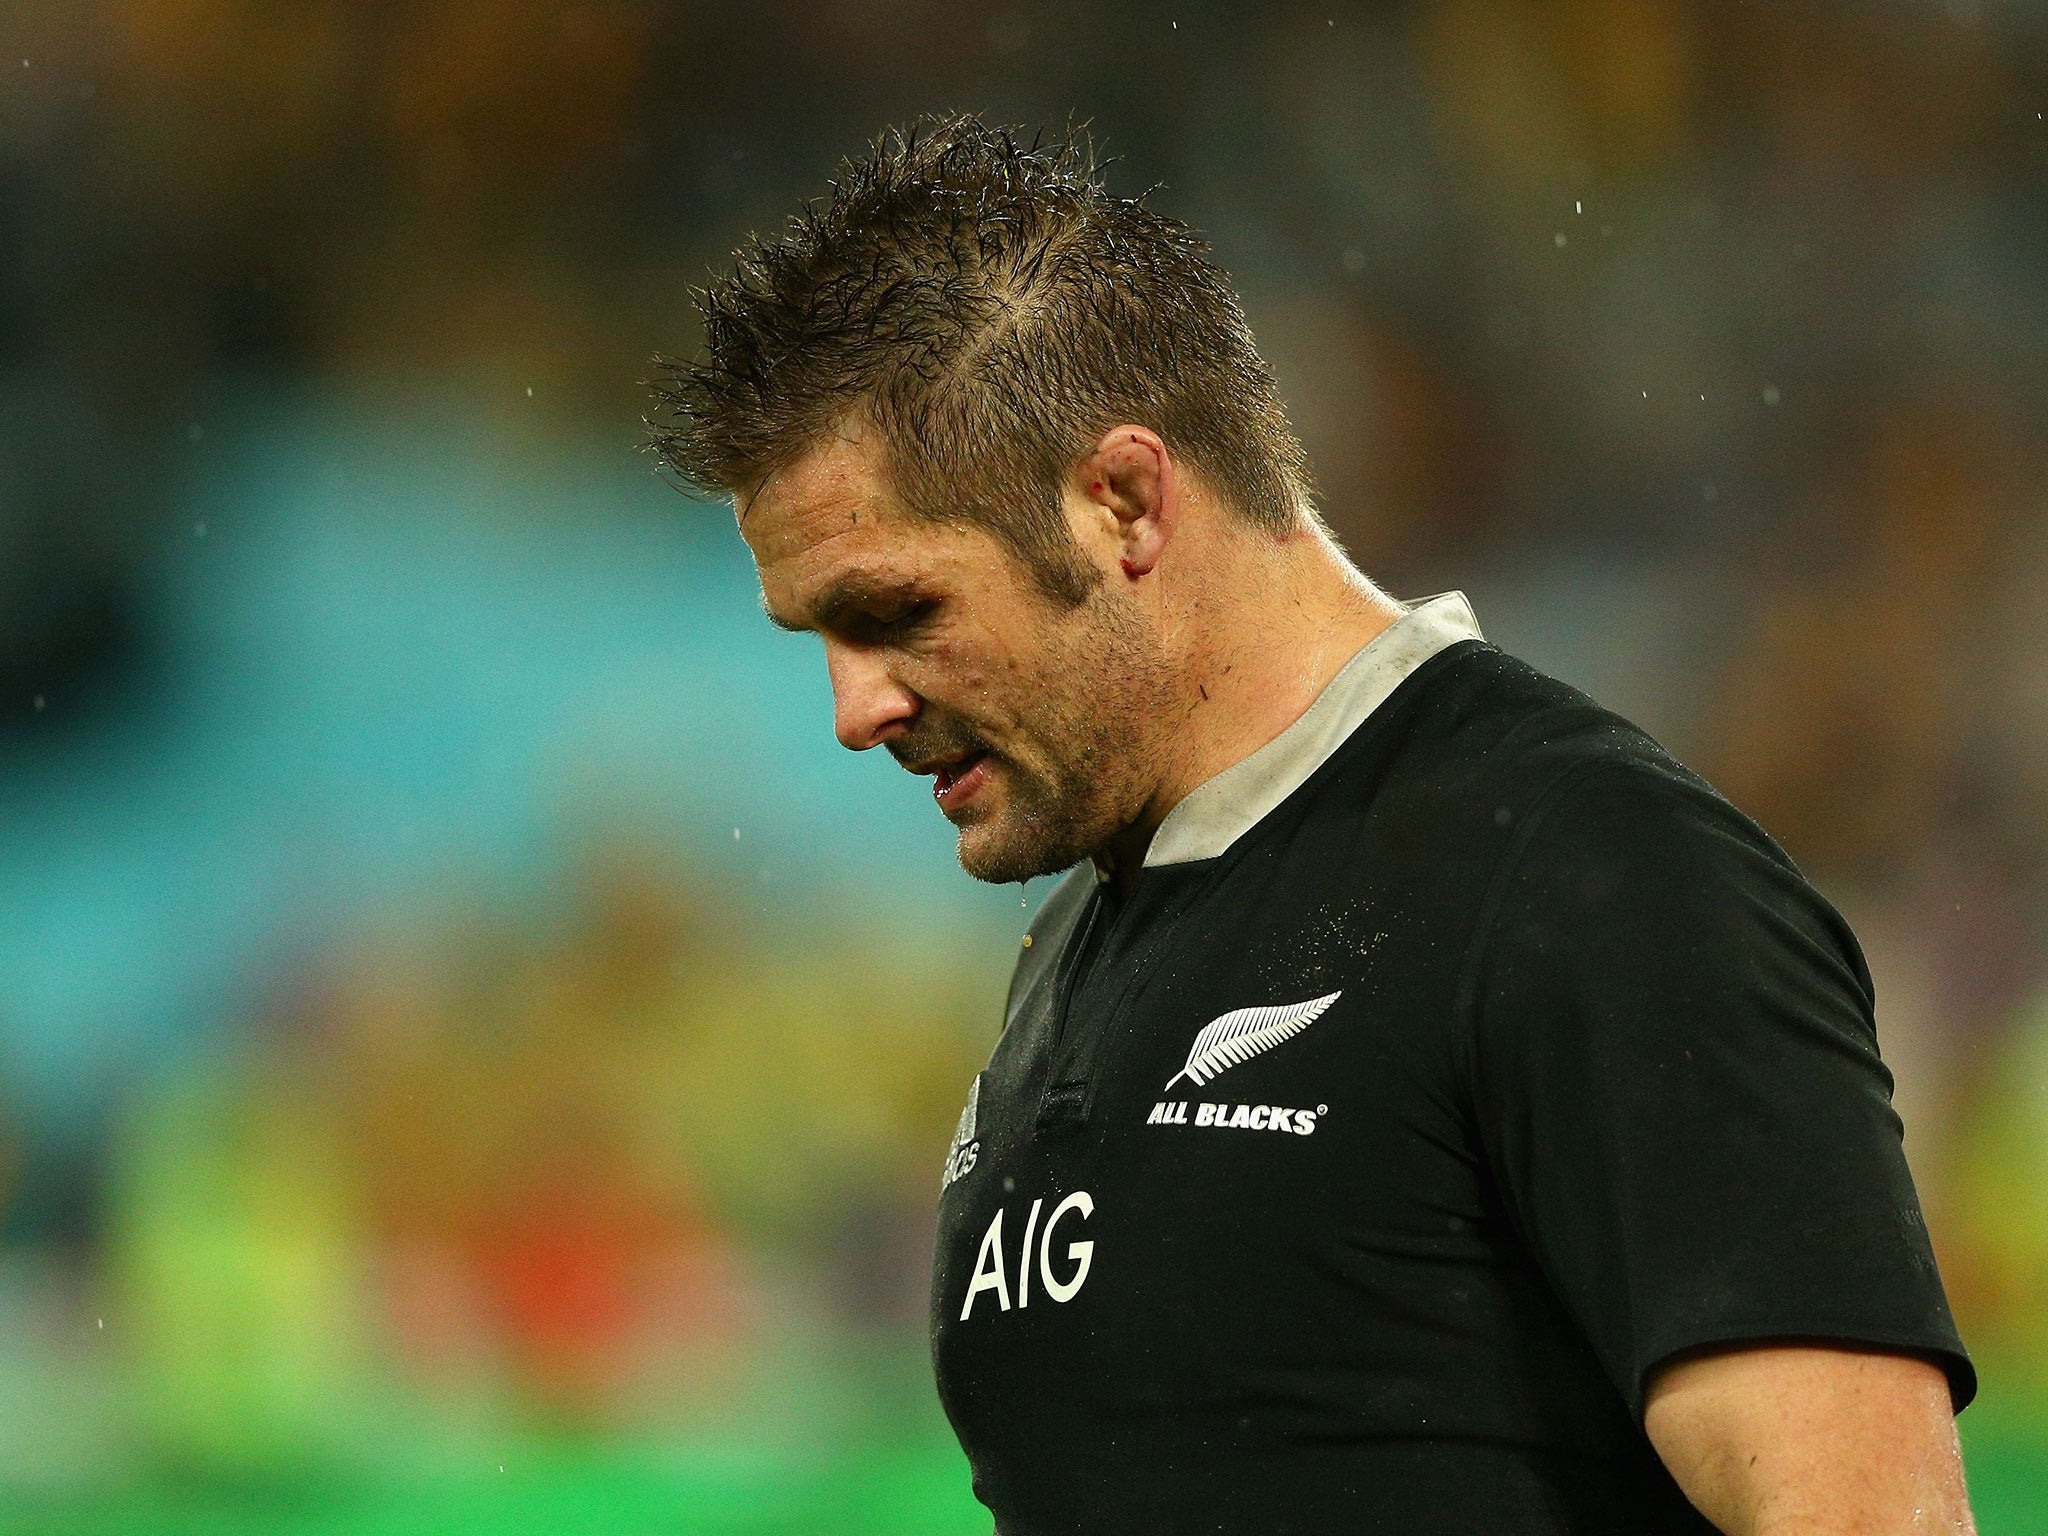 Rickie McCaw looks on disappointed after the 12-12 draw with Australia